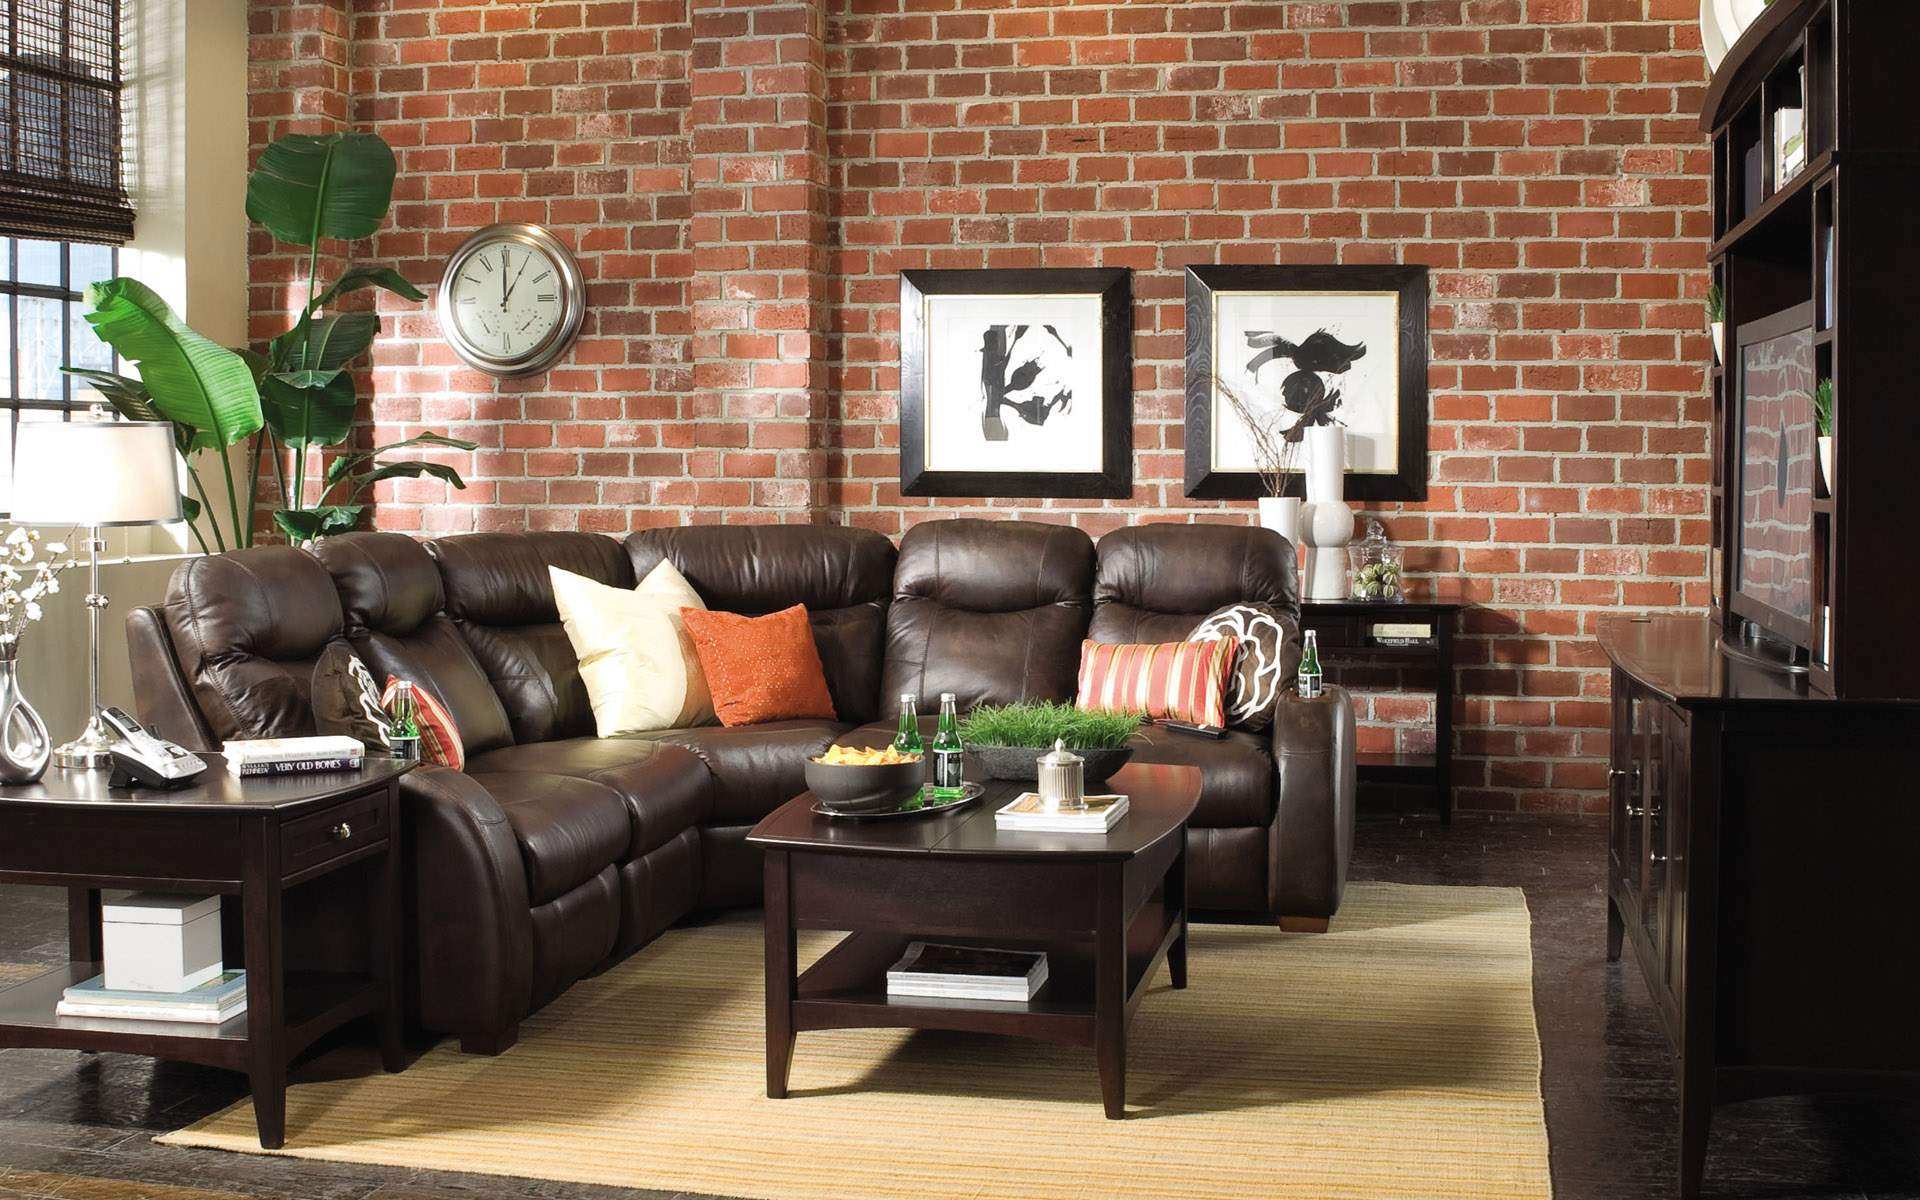 Minimalist Living Ideas Breathtaking Minimalist Living Room Decor Ideas With Red Brick Side Wall Design Furnished With Dark Brown Sofa And Table On Rug Plus Completed With Table Lamp Living Room The Best Living Room Decor Ideas That You Can Fix By Yourself